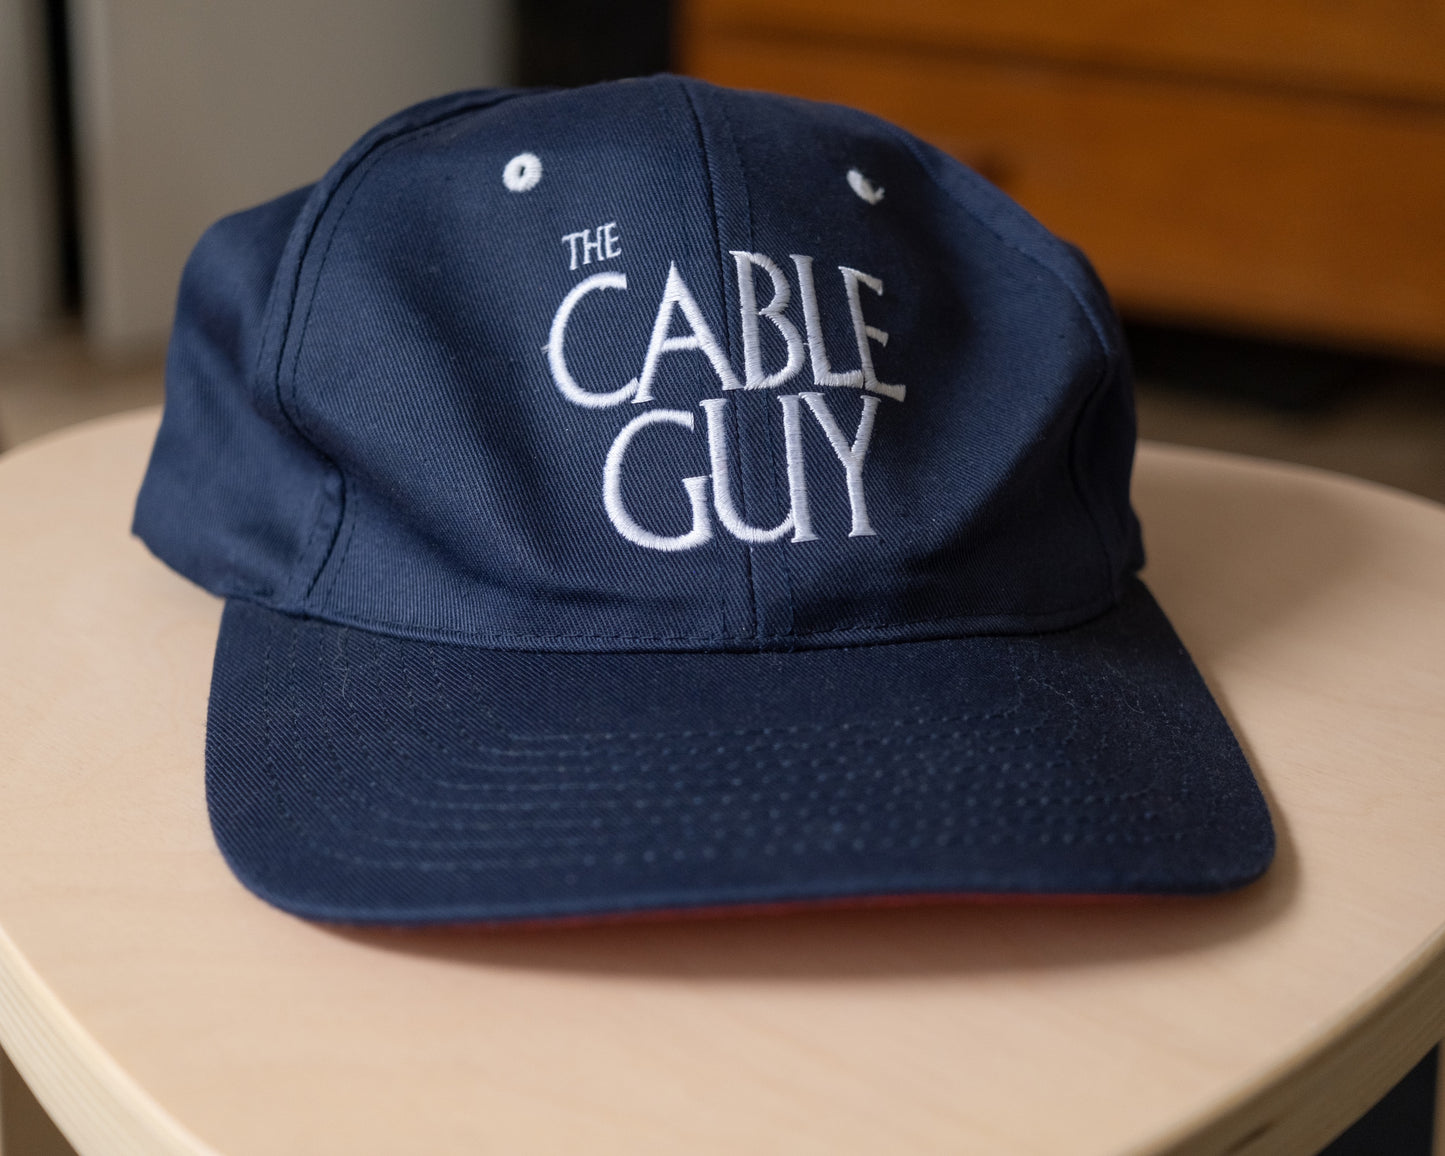 The Cable Guy Movie Vintage Snapback Hat